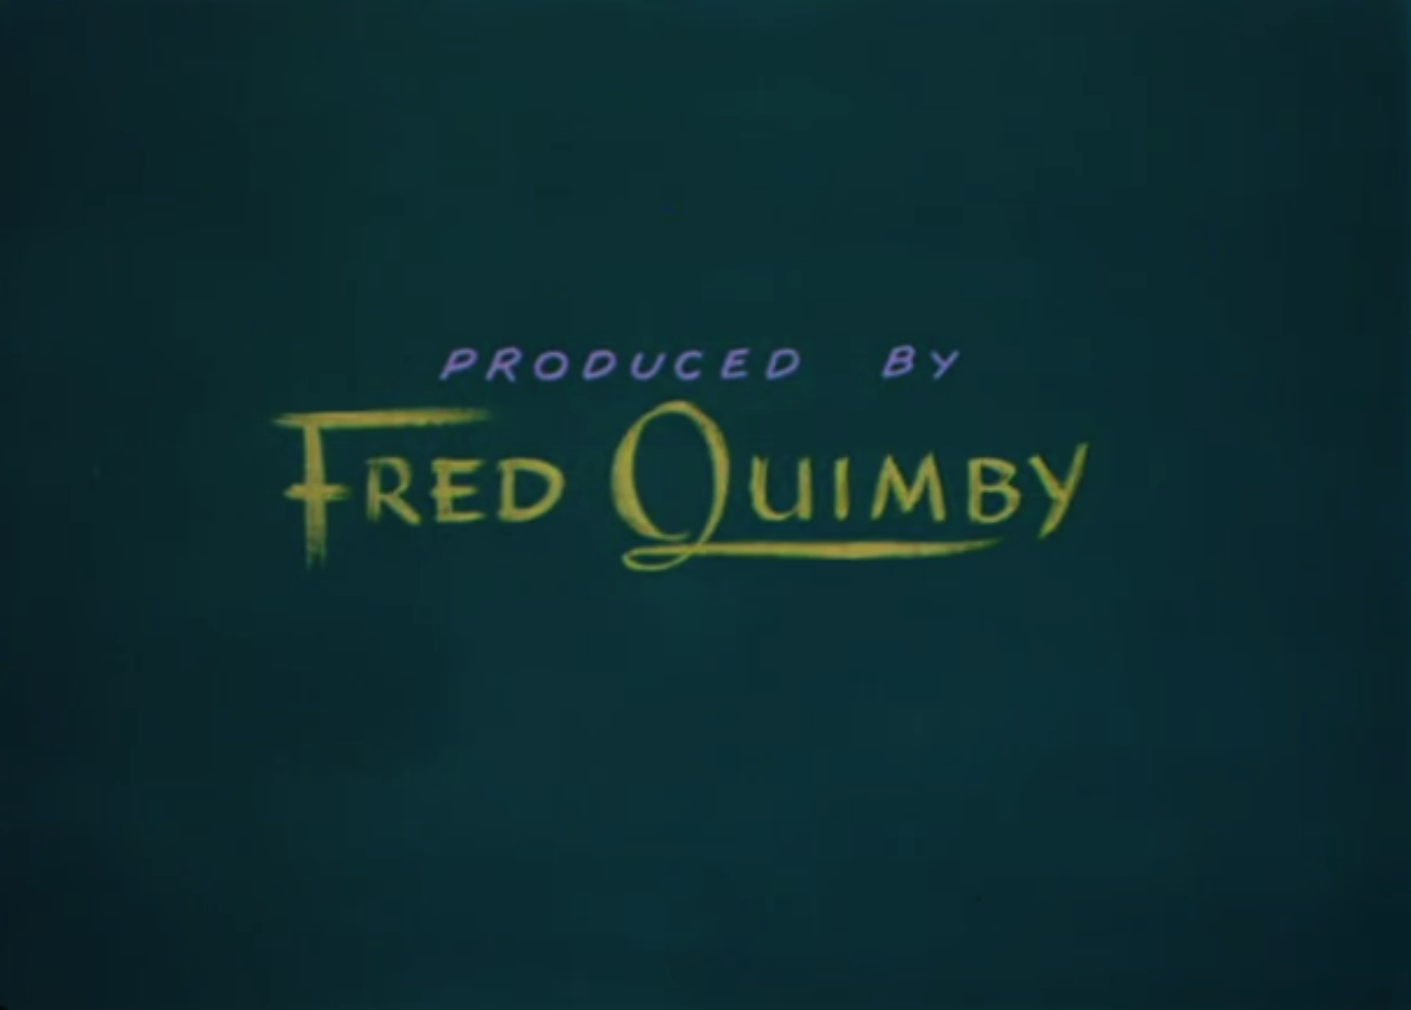 tom and jerry fred quimby collection